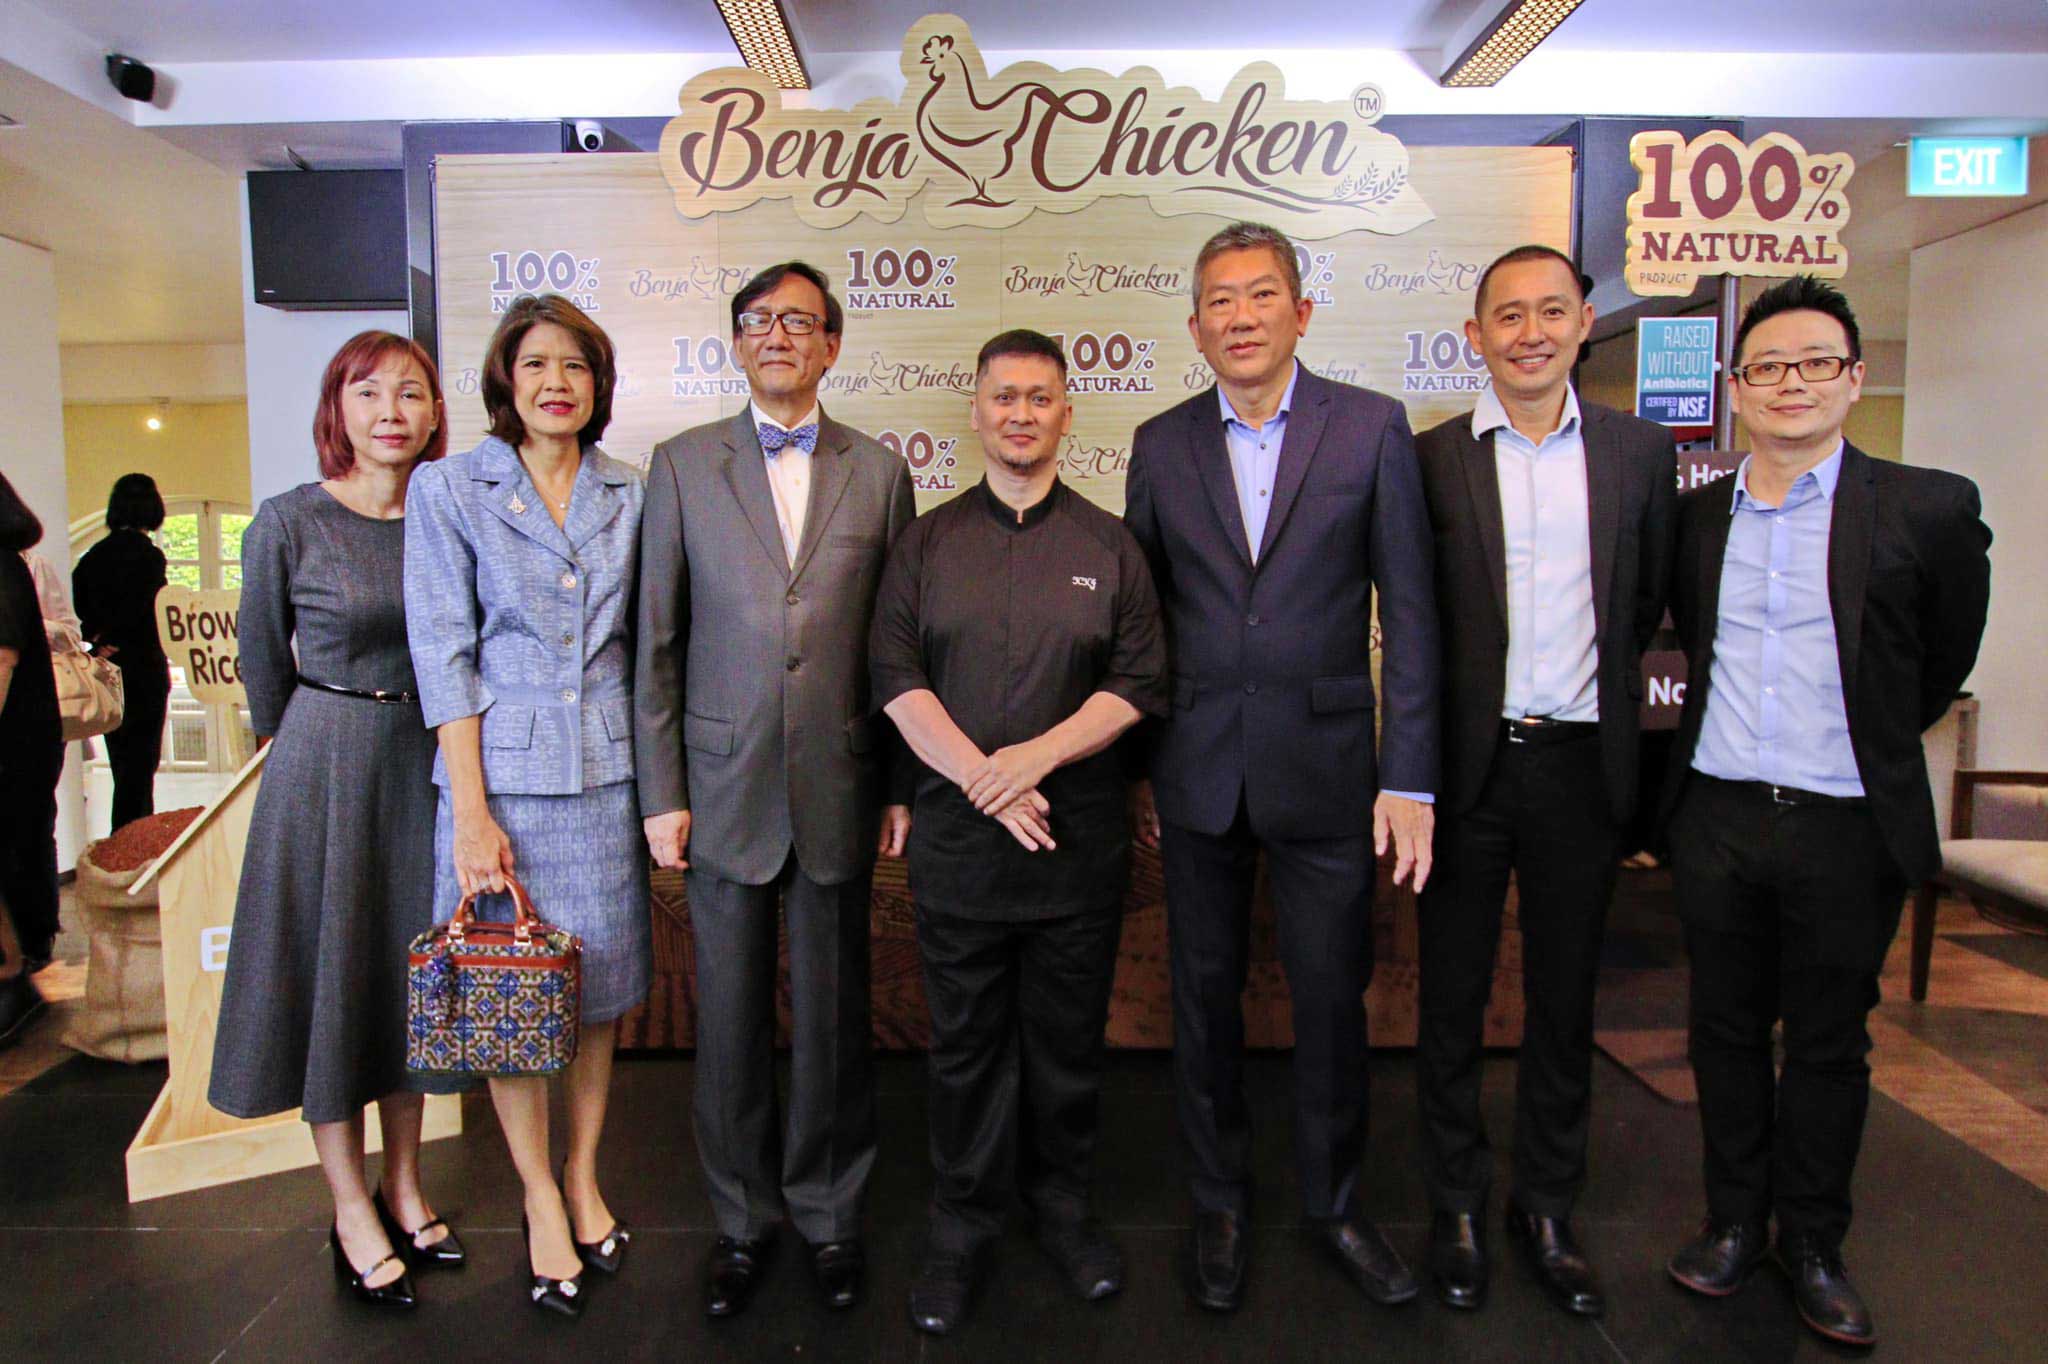 UFarm's Benja Chicken, the World's First Brown Rice-Fed Chicken, Now in Singapore!